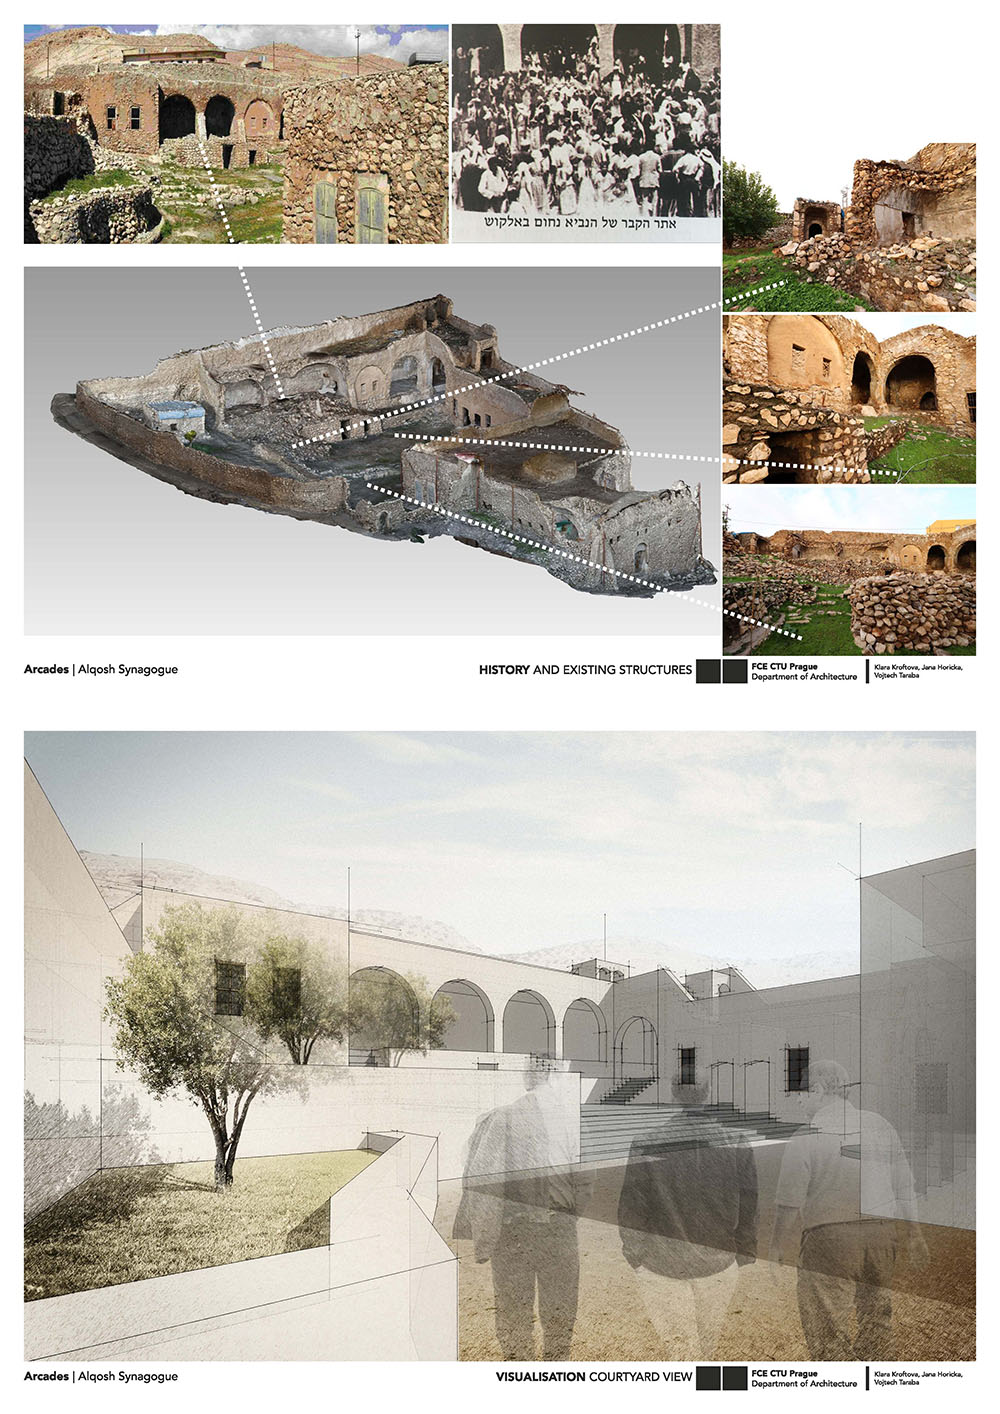 From the visualization model of the renovated tomb site (Design: ARCH International and GEMA Art International)